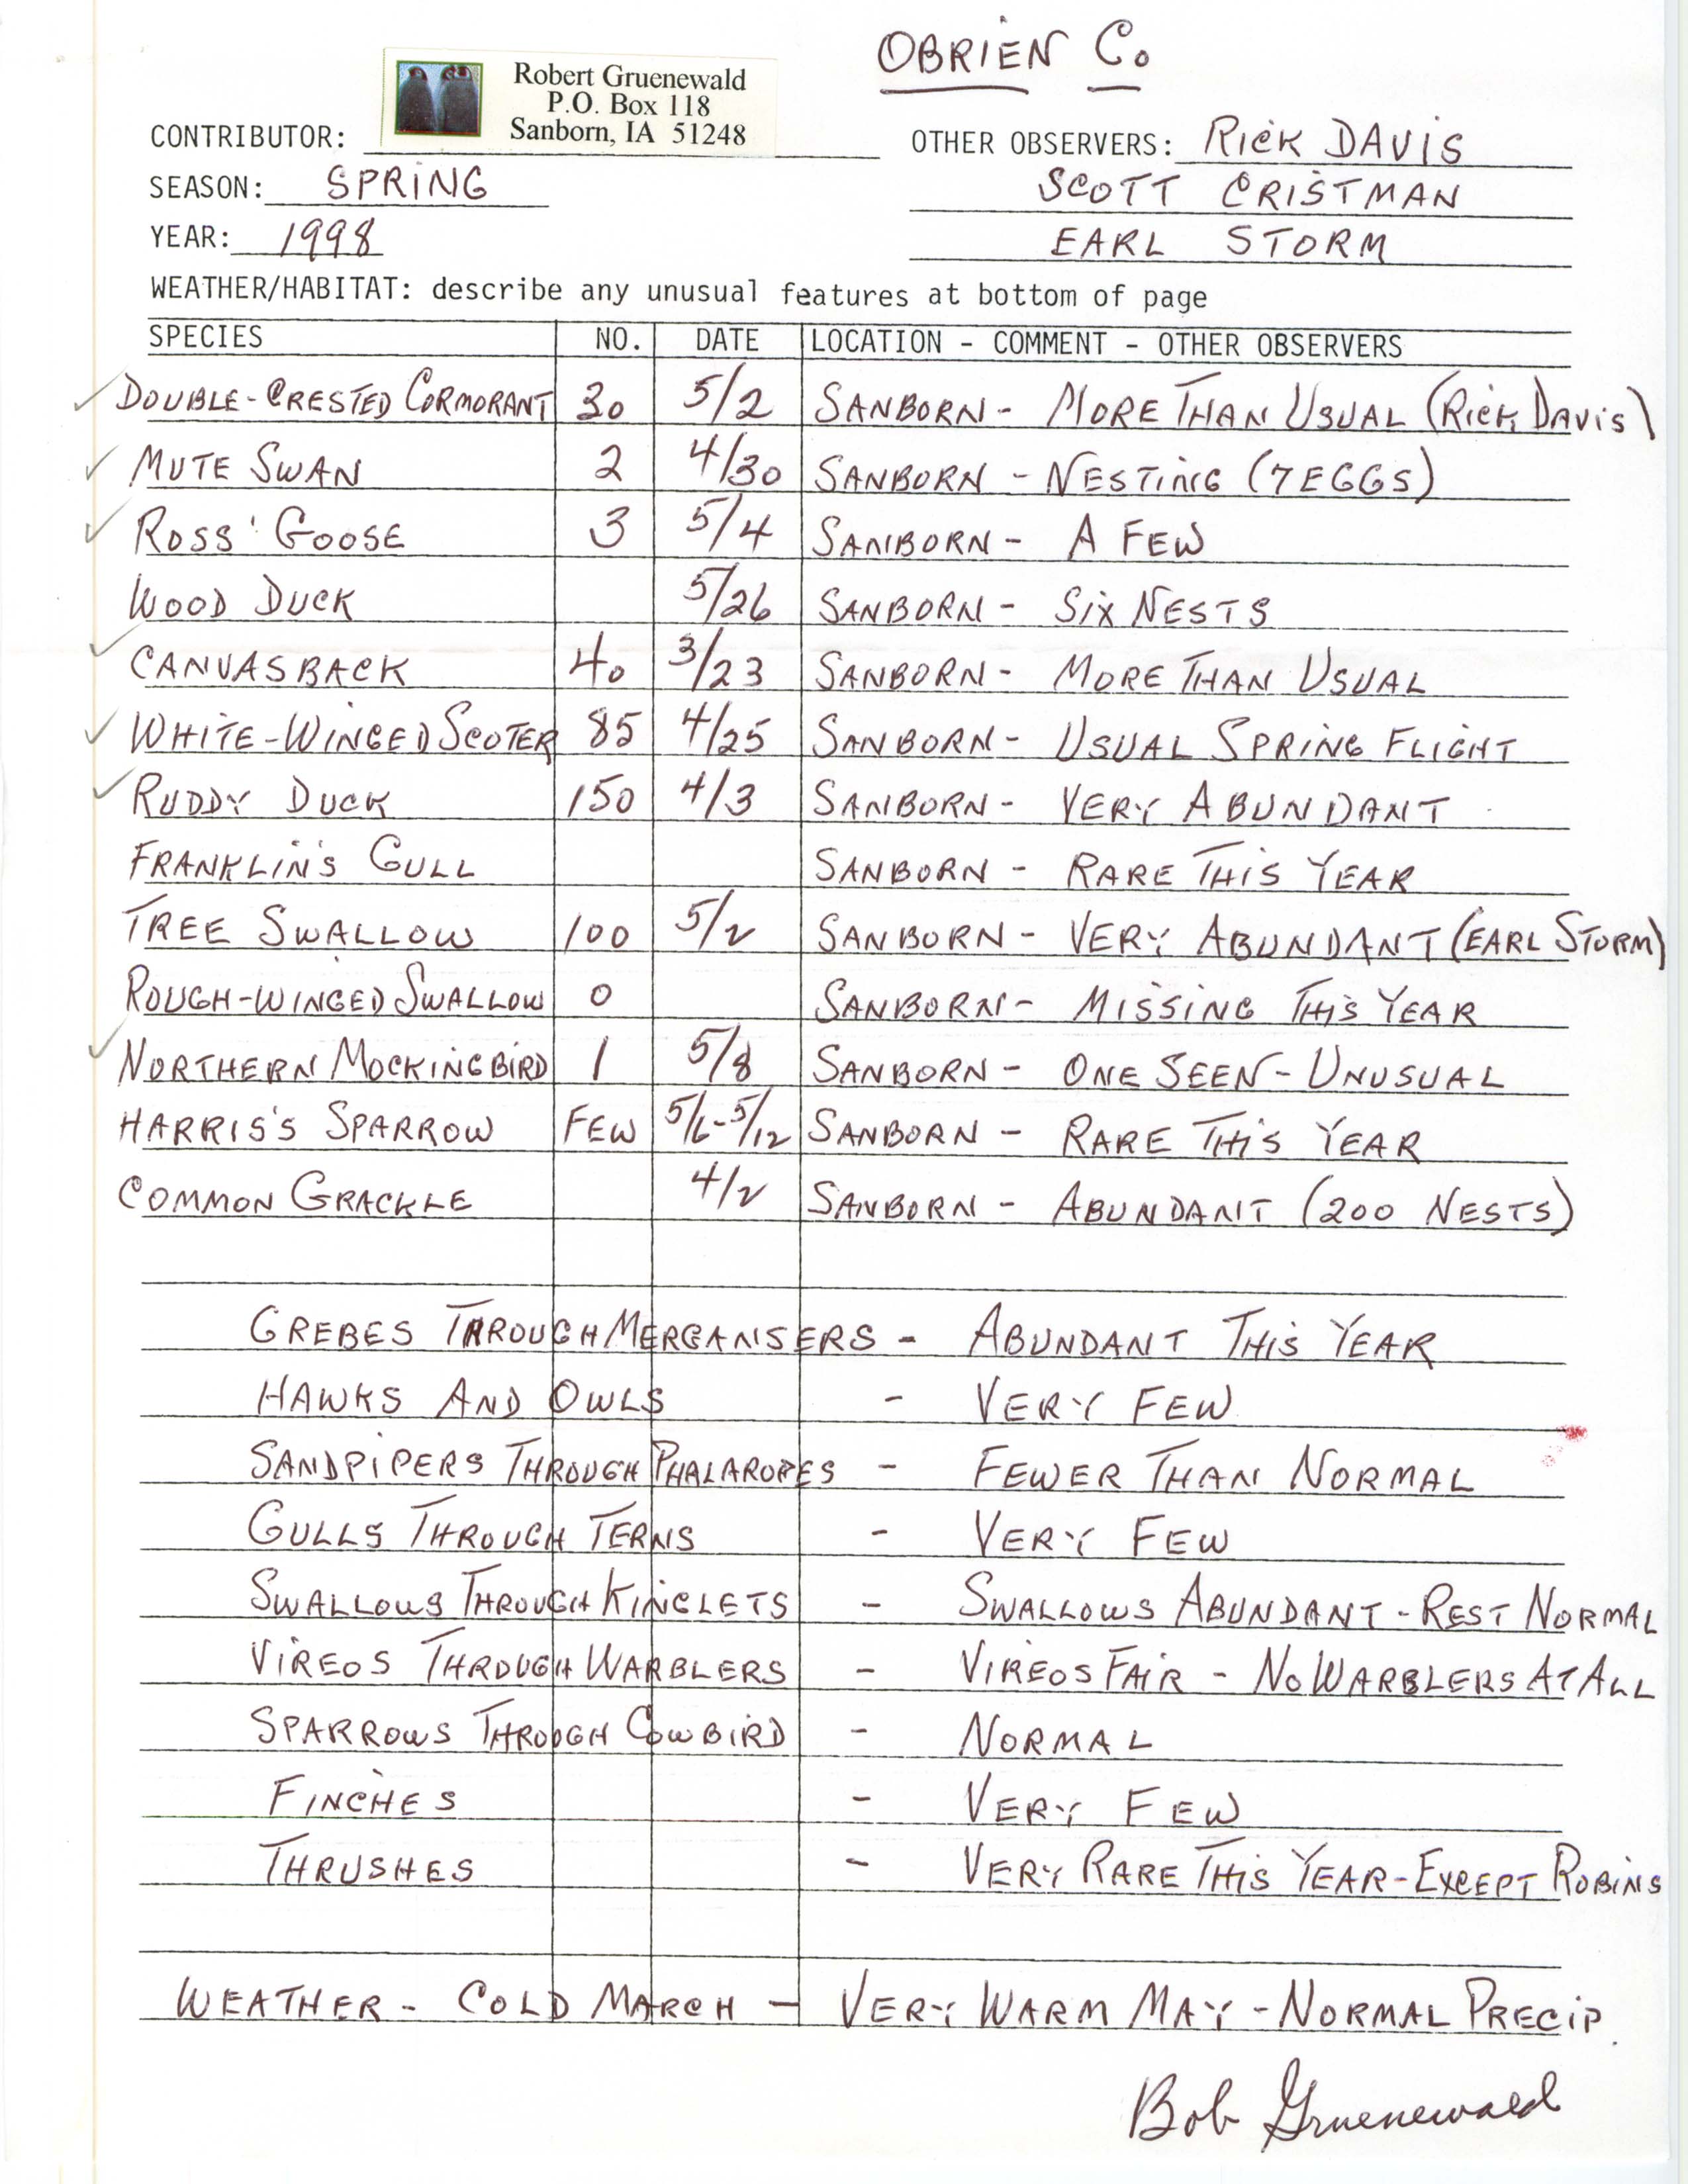 Field reports form for submitting seasonal observations of Iowa birds, Robert Gruenewald, spring 1998